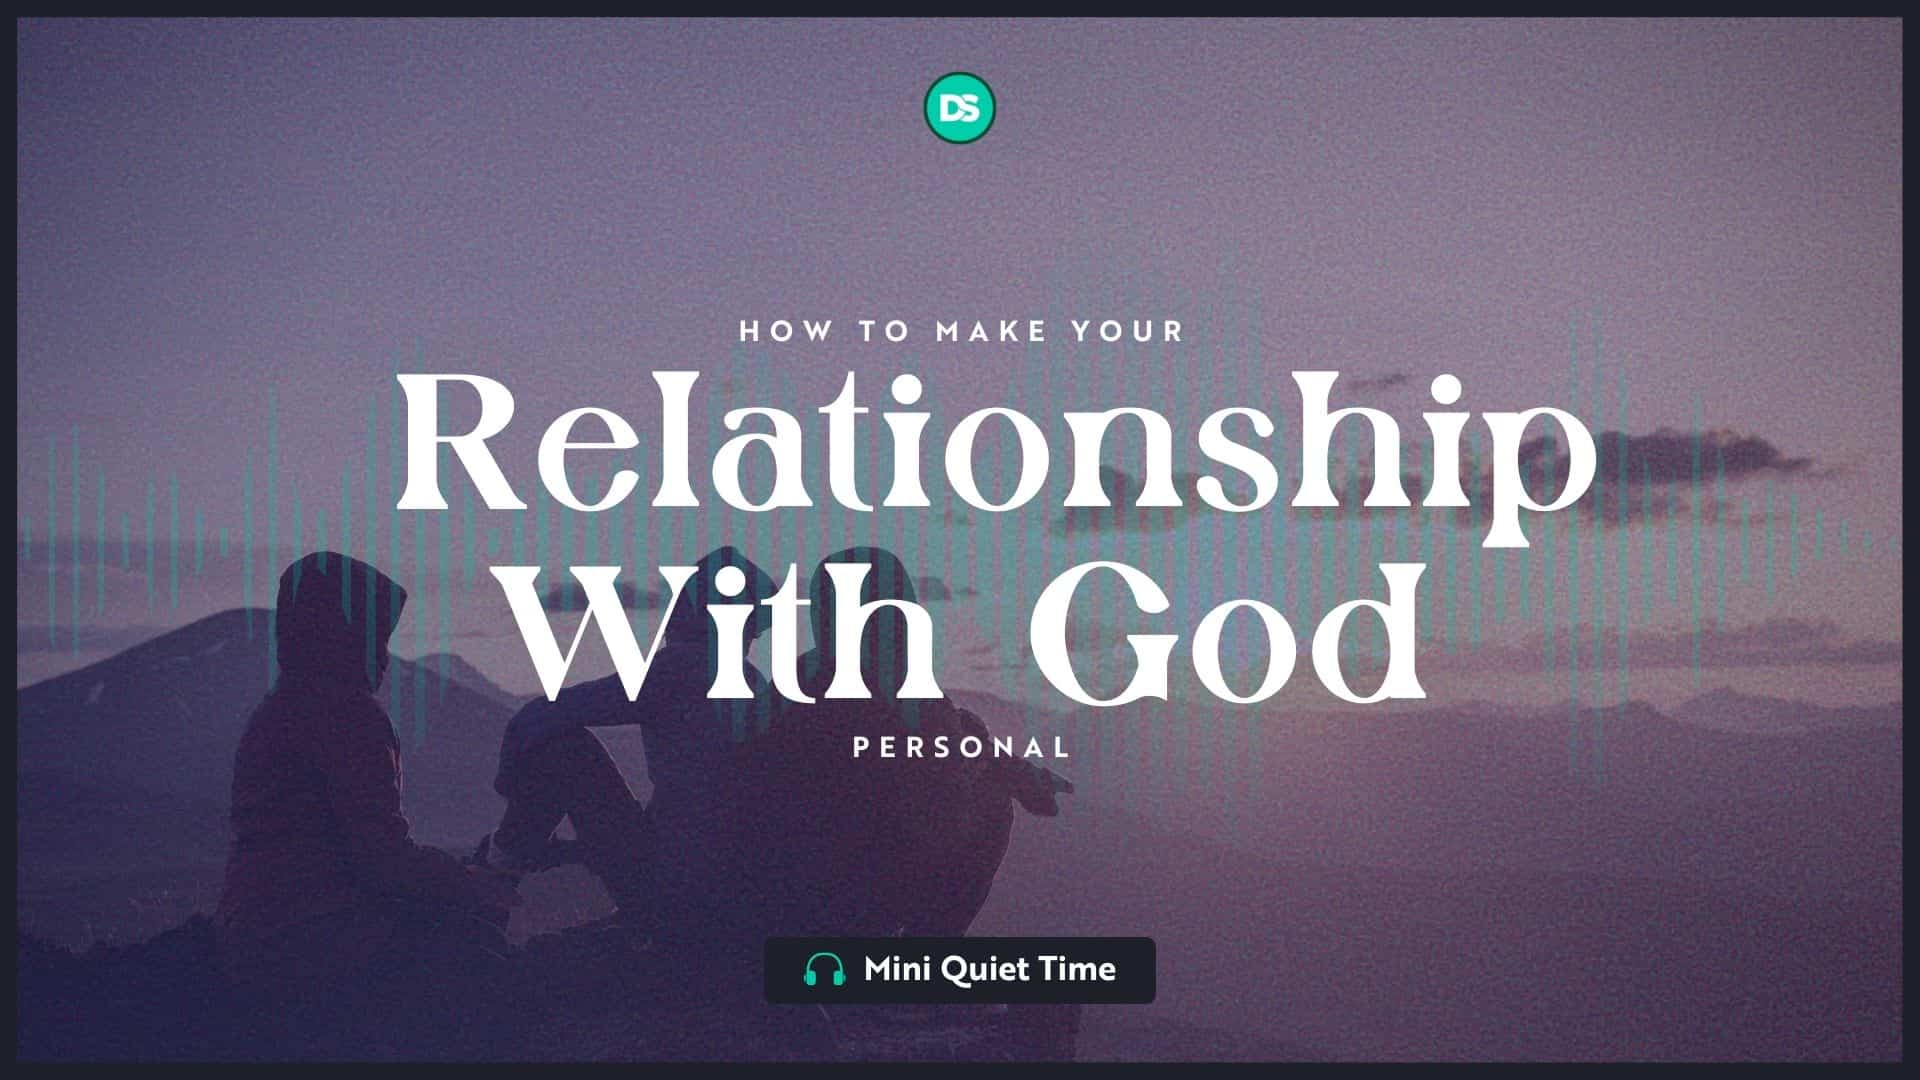 How to Make Your Relationship With God Personal (Mini Quiet Time) 10